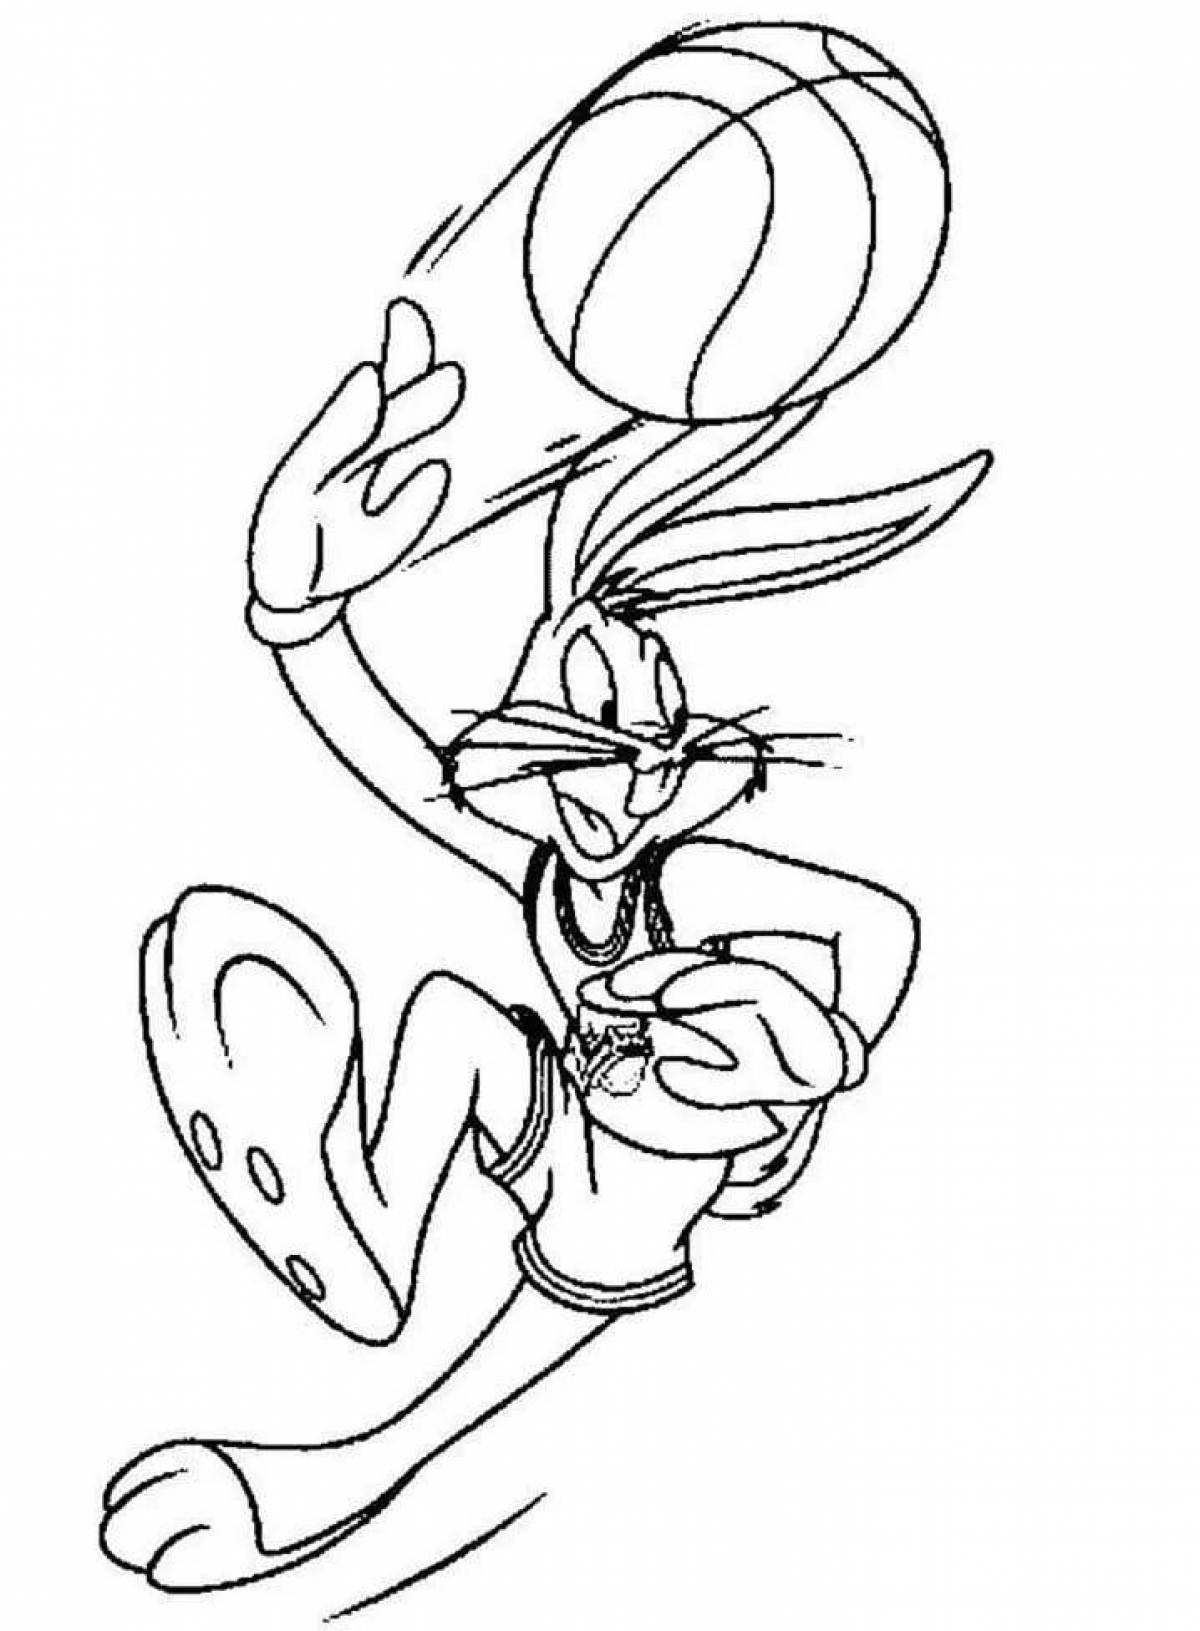 Distinguished Space Jam coloring page